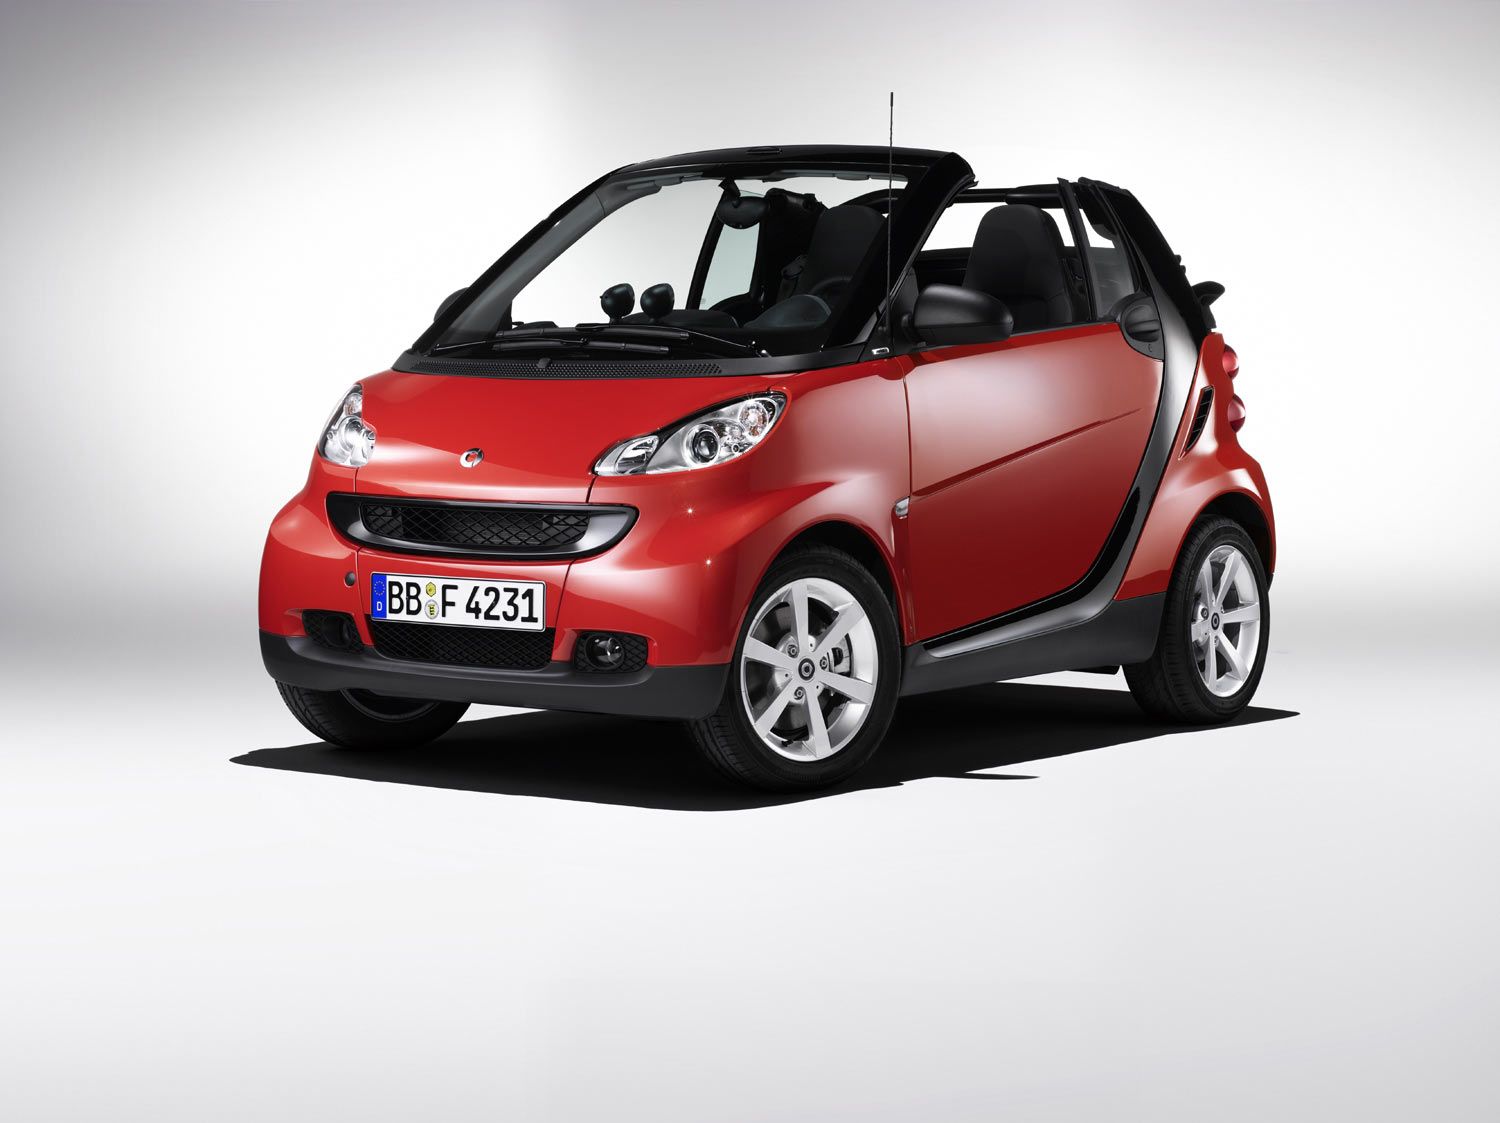 2007 Smart Fortwo Second Generation